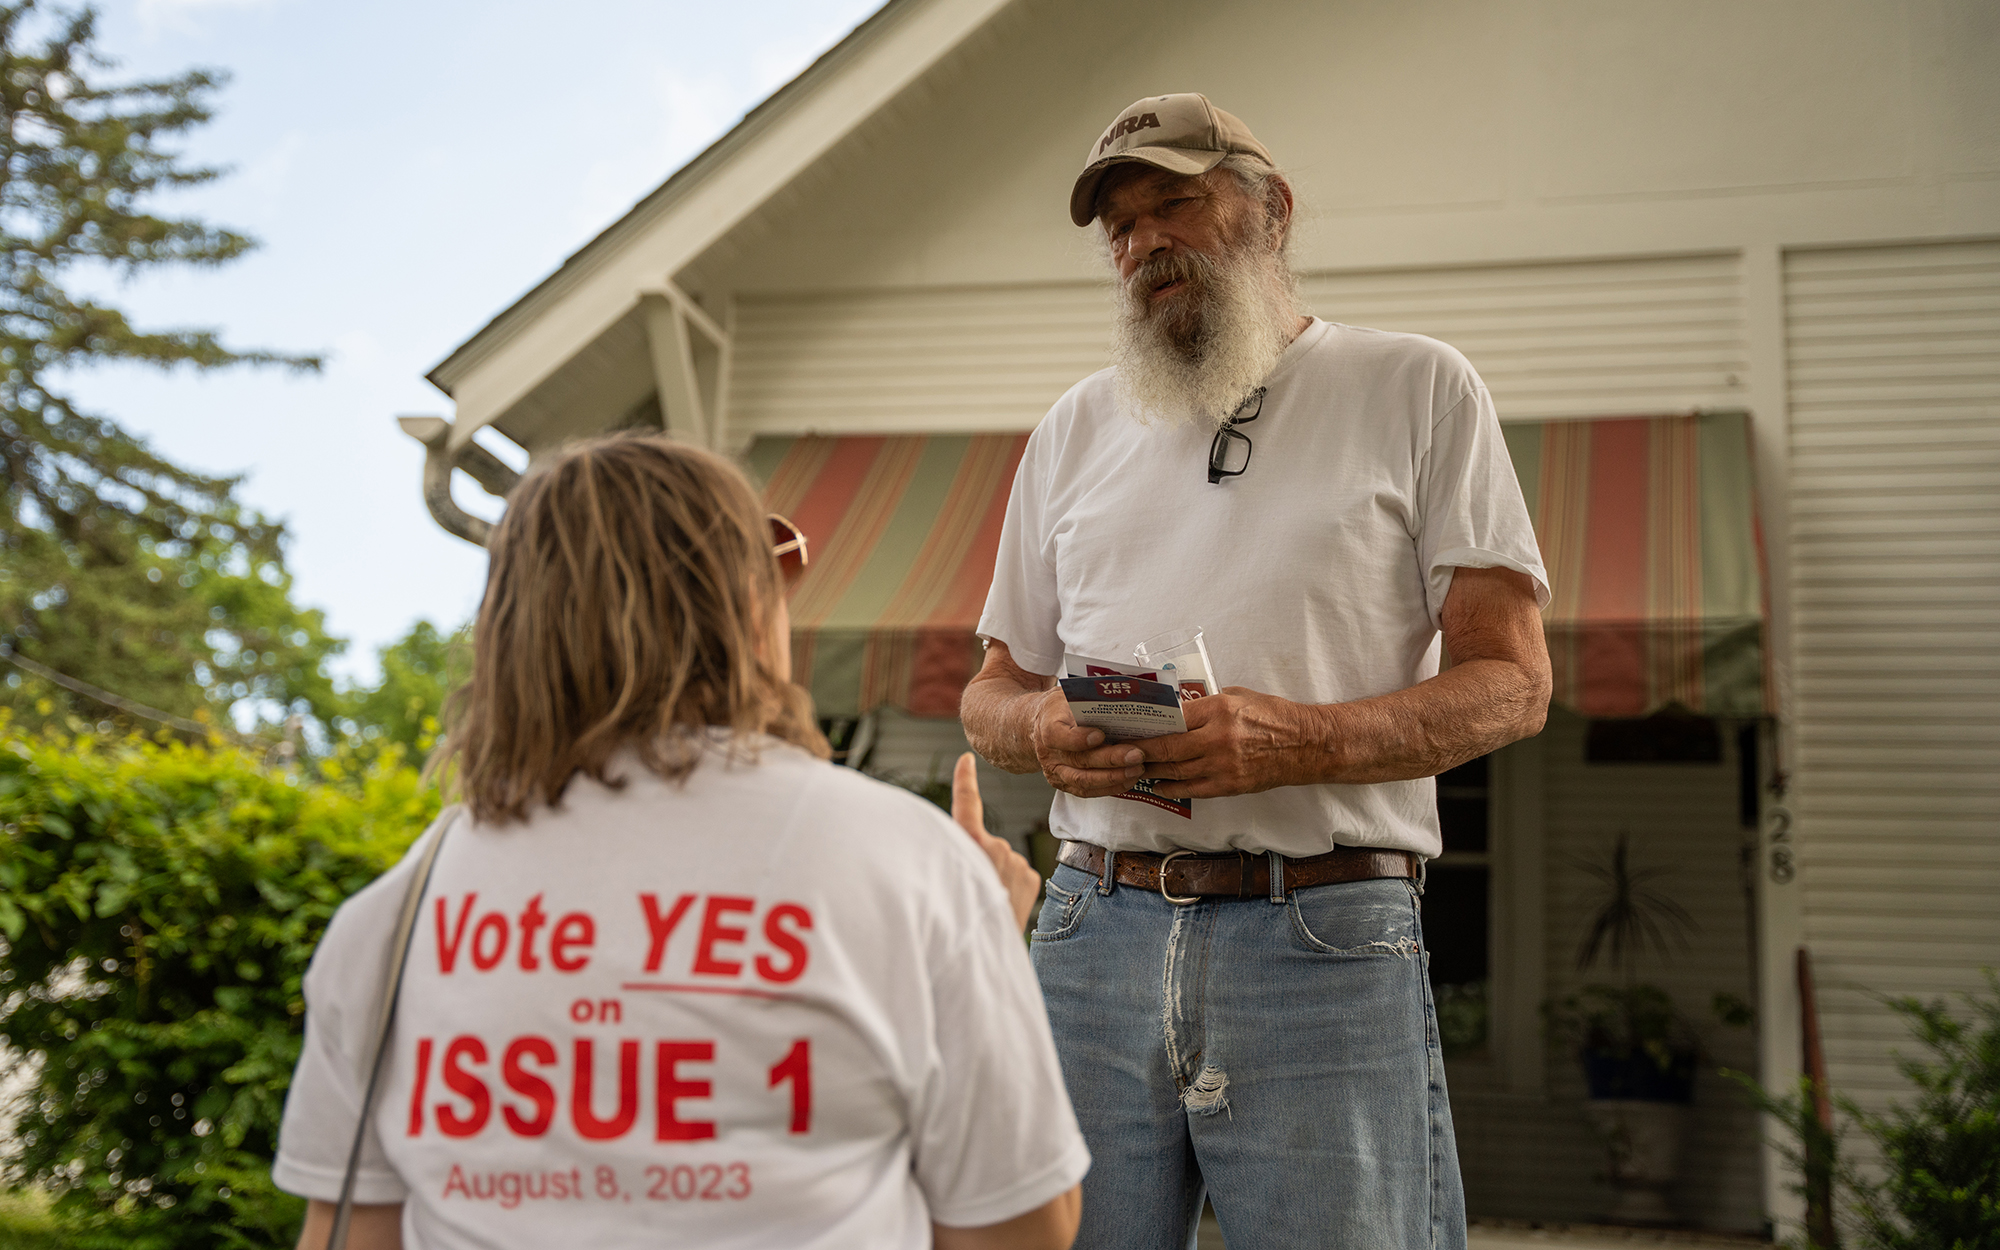 Janine Baker, president of the Delaware City Republican Club, left, urges Larry Kenney to vote “yes” on Ohio State Issue 1 while canvassing on June 24, 2023, in Delaware, Ohio. An Aug. 8 special election aims to increase the threshold required to change the state constitution. (Photo by Mingson Lau/News21)